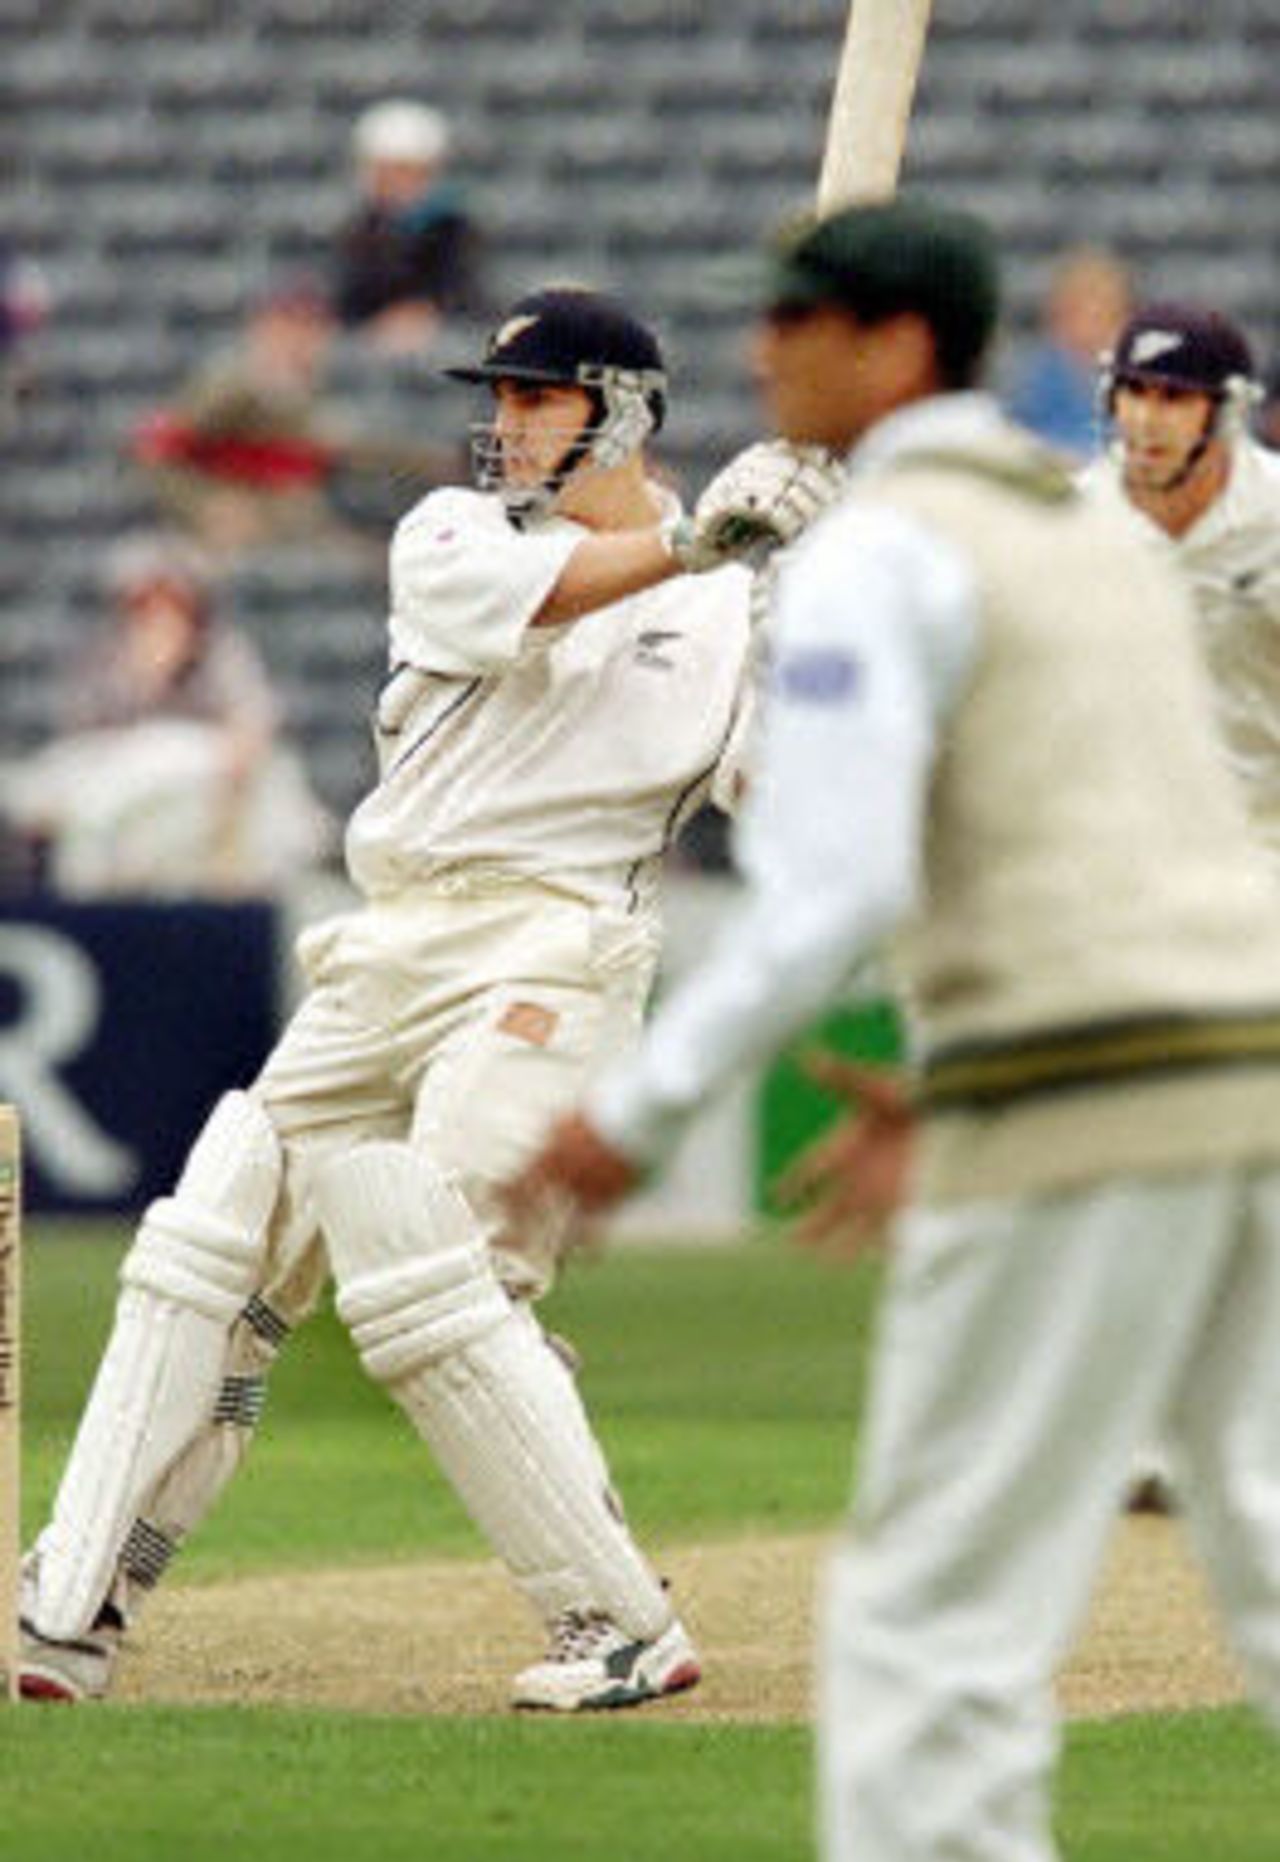 Mathew Sinclair hooks a ball to the boundary on the way to his century as Stephen Fleming and Younis Khan look on, day 1, 2nd Test at Christchurch, 15-19 March 2001.